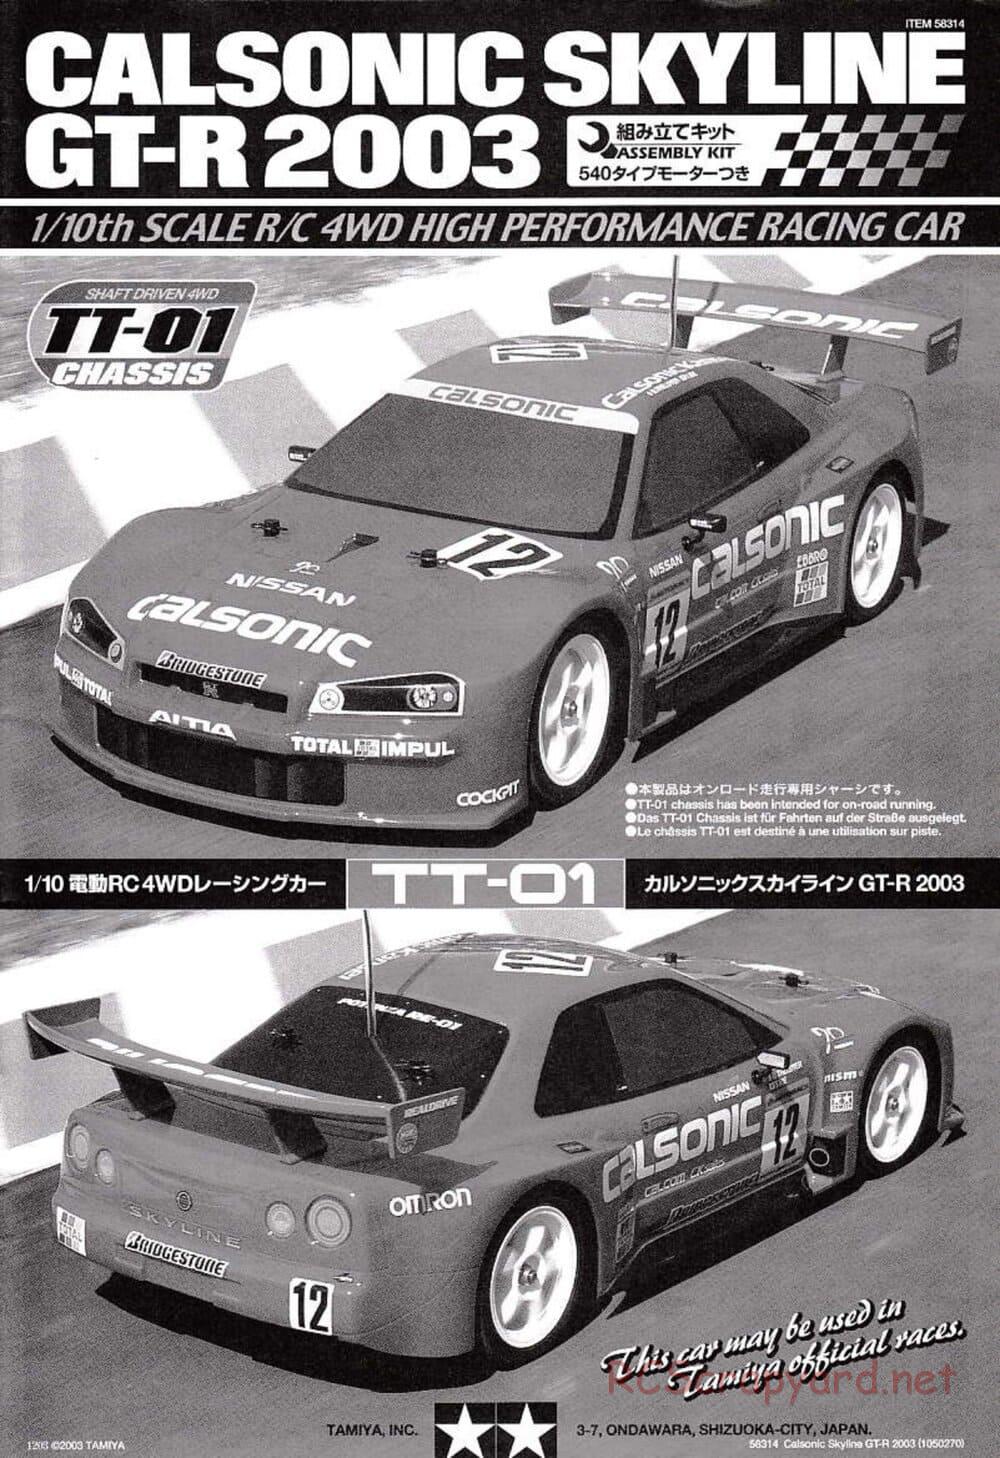 Tamiya - Calsonic Skyline GT-R 2003 - TT-01 Chassis - Manual - Page 1